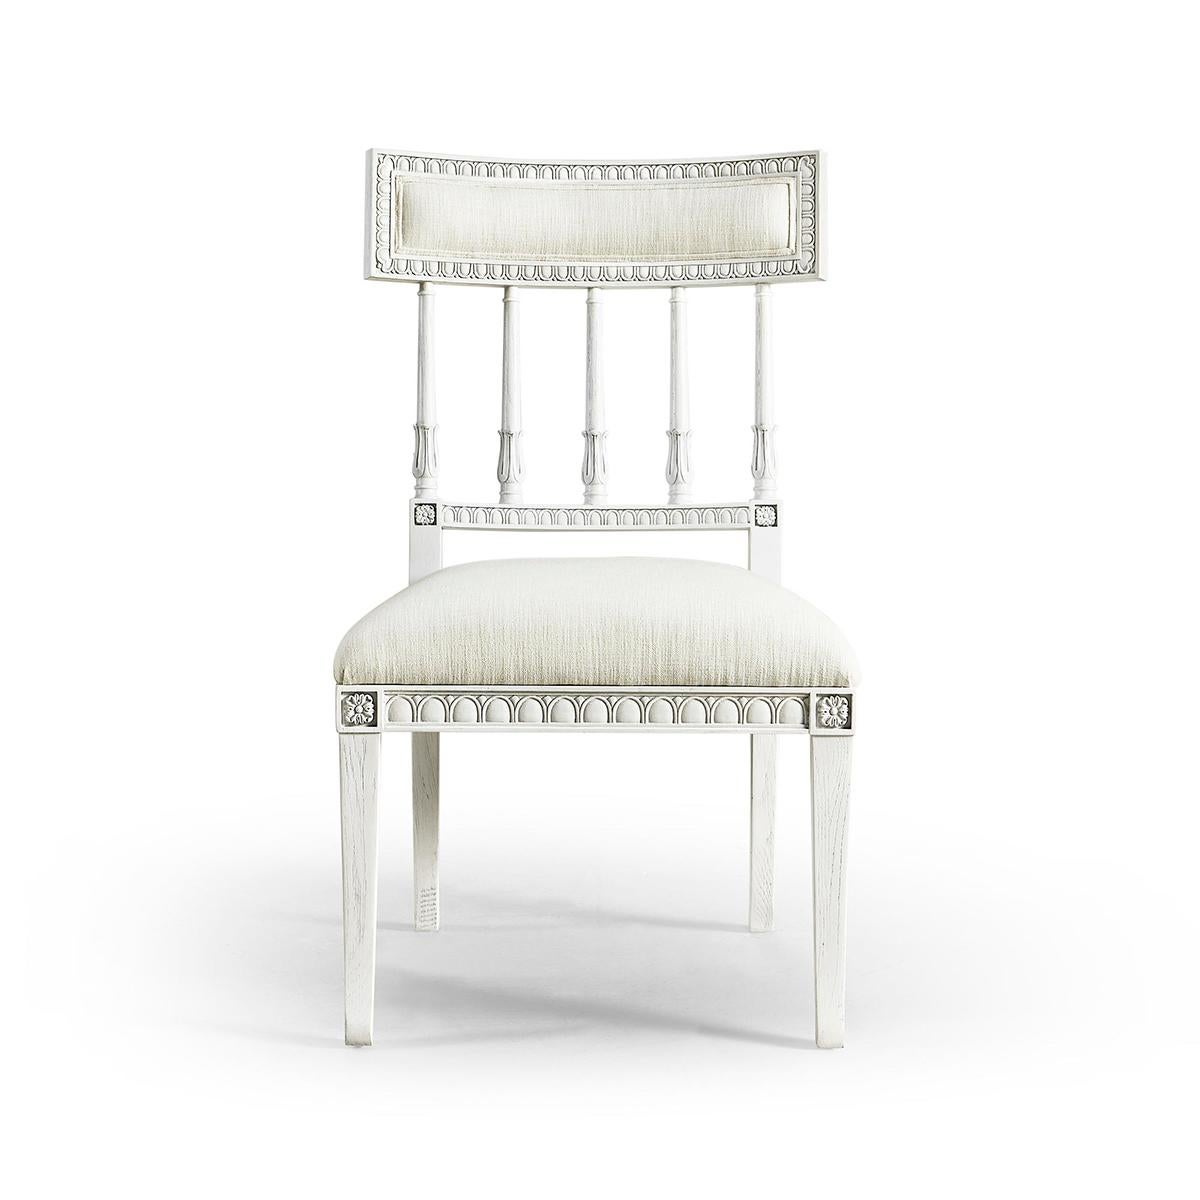 A Swedish Neo-Classic Gustavian style dining chair, with a chalky white painted finish, carved upholstered top rail about turned acanthus wrapped plates, with a box cushion seat raised on flared legs. 

Dimensions: 21.25